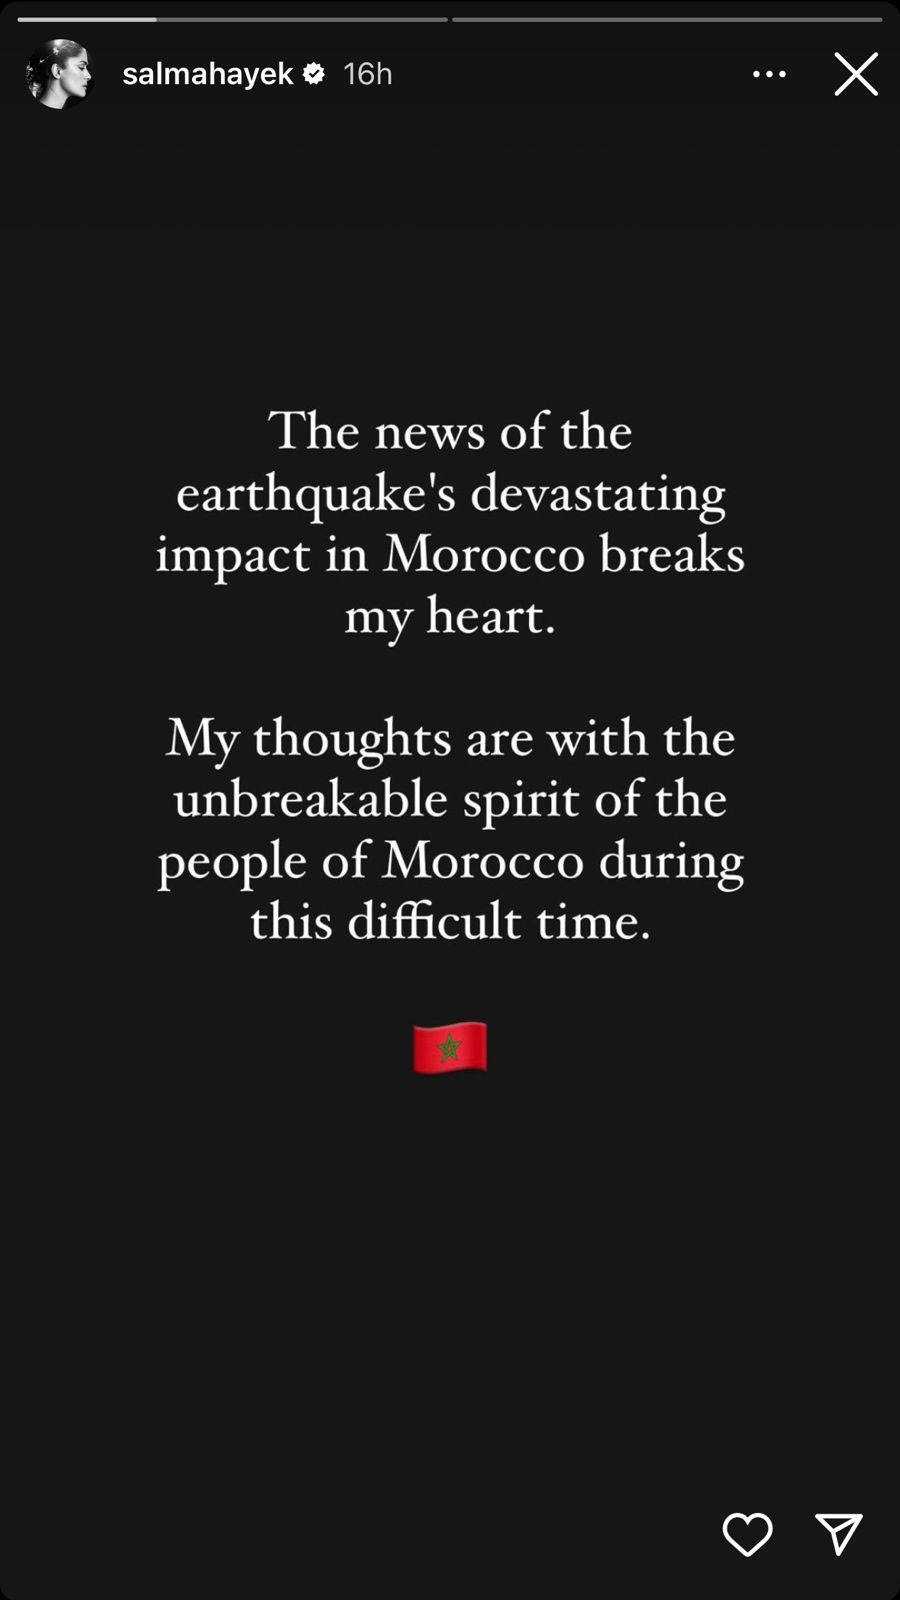 Salma Hayek stands in solidarity with Moroccos earthquake victims